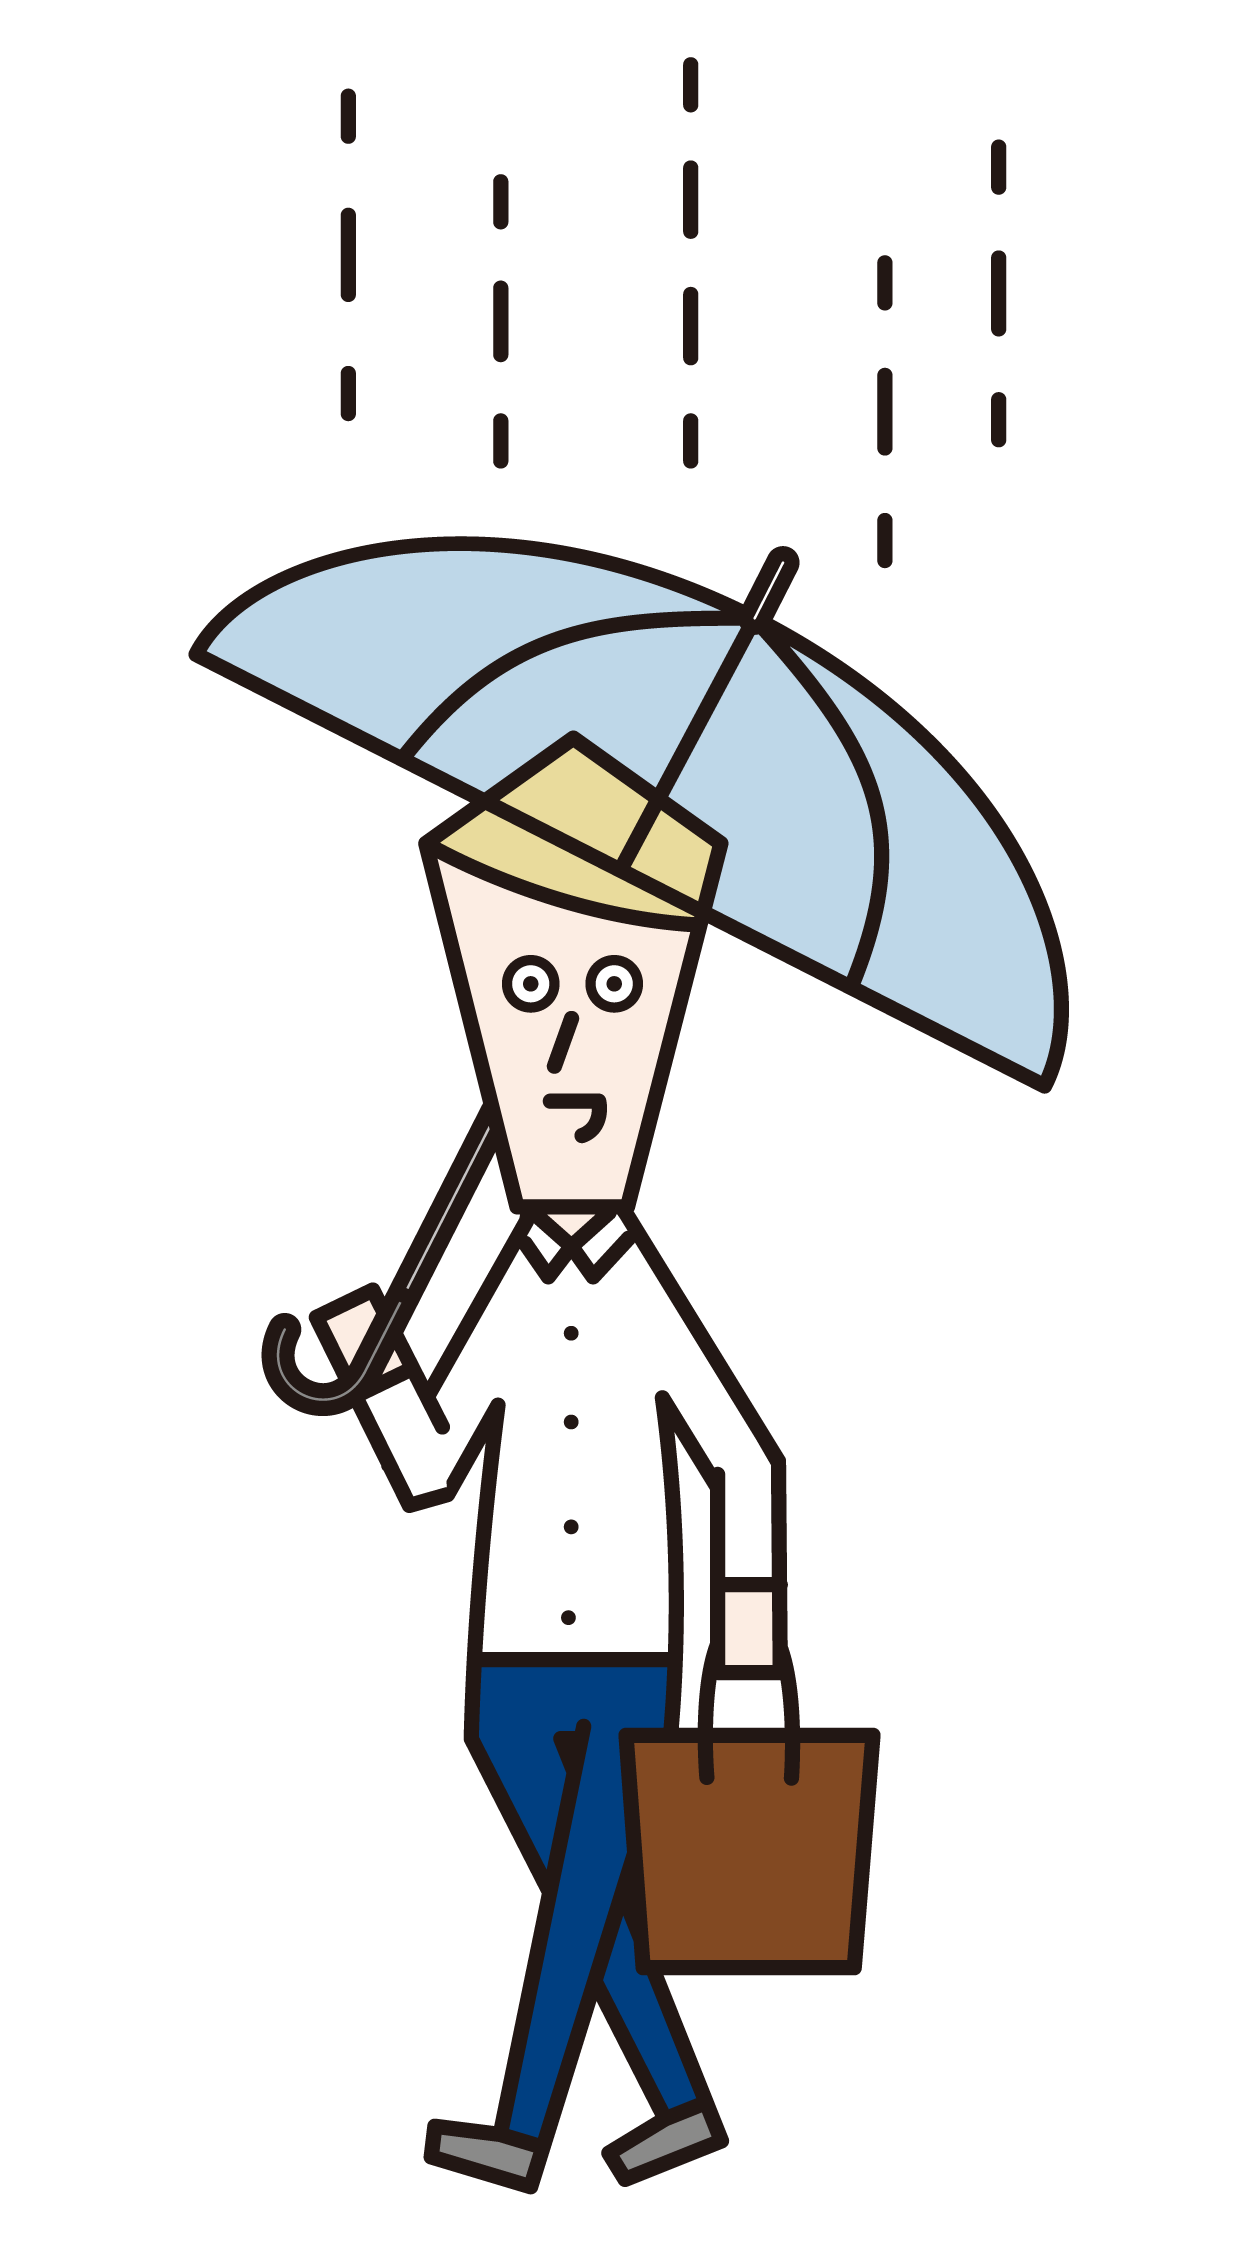 Illustration of a man walking with an umbrella